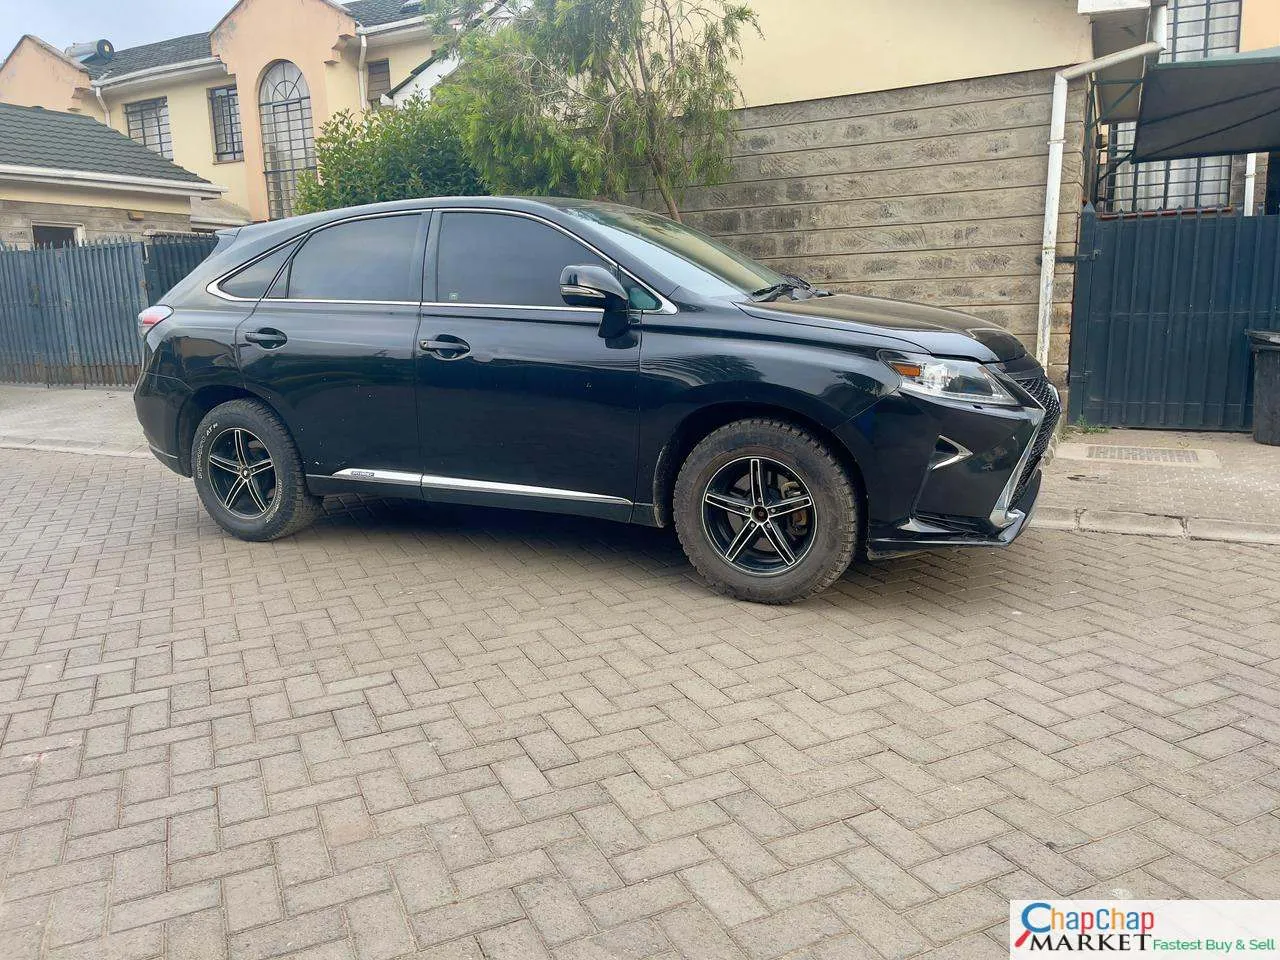 LEXUS RX 450h hybrid You Pay 30% Deposit Trade in OK EXCLUSIVE hire purchase installments For Sale in Kenya Lexus rx450h kenya